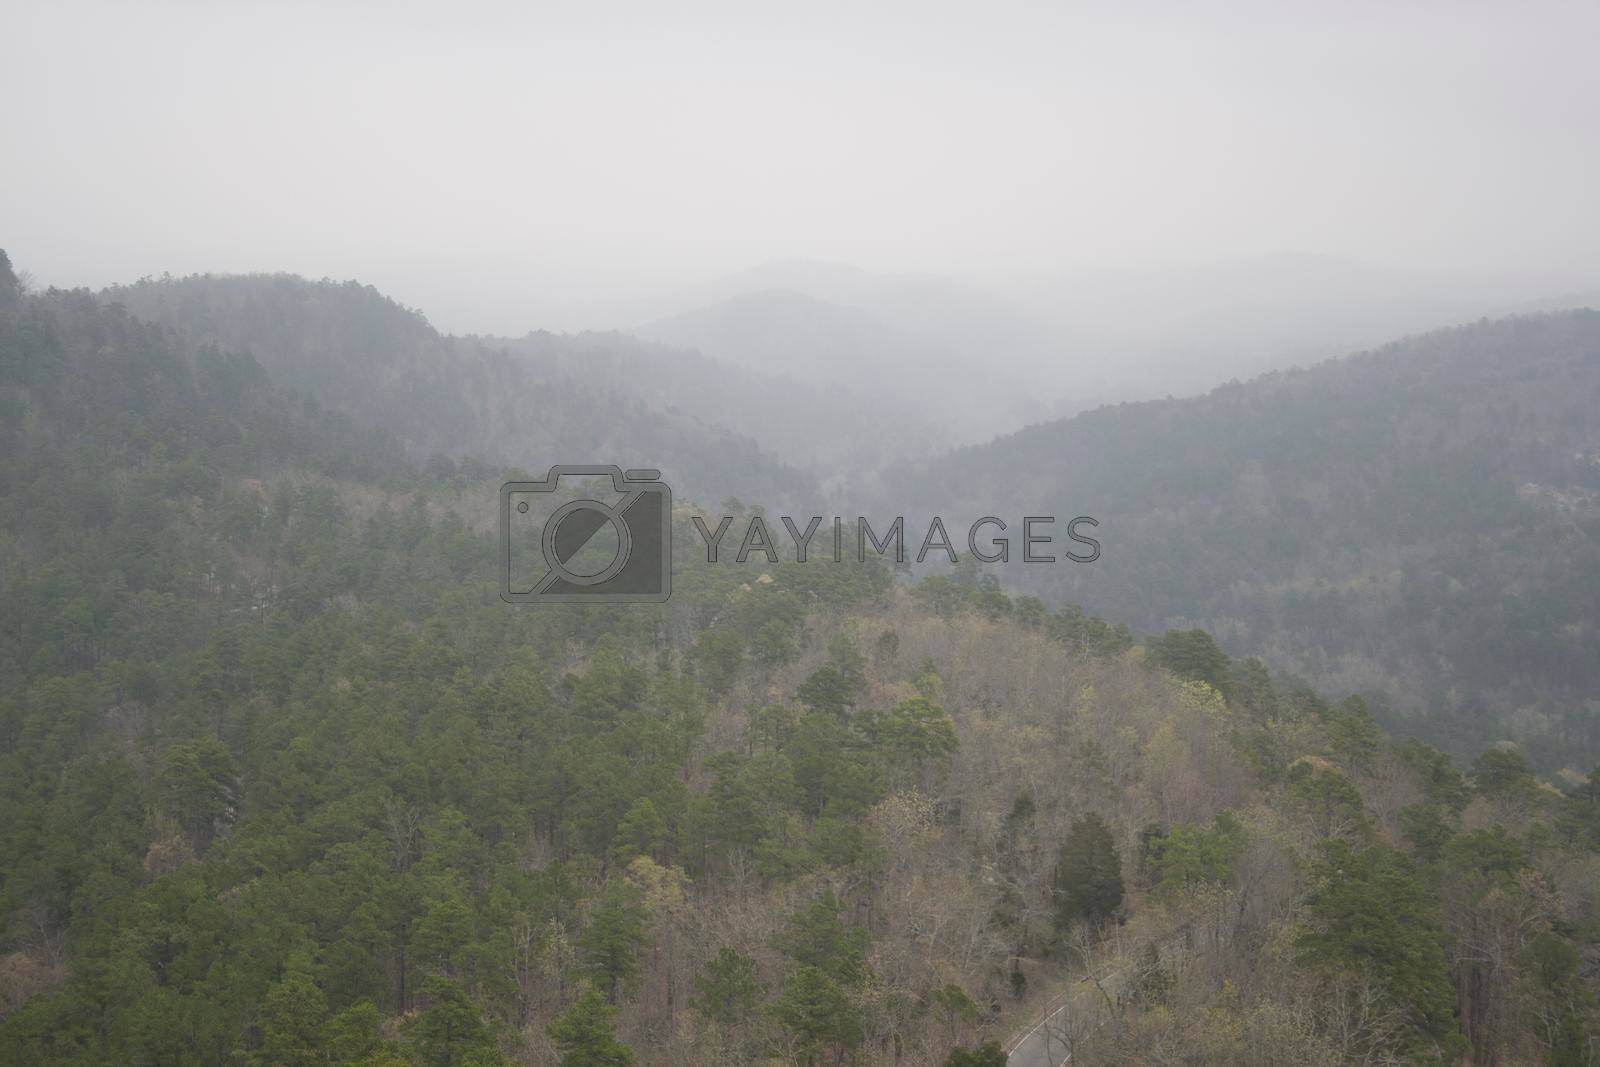 Royalty free image of Hot Springs National Park, Arkansas by Txs635